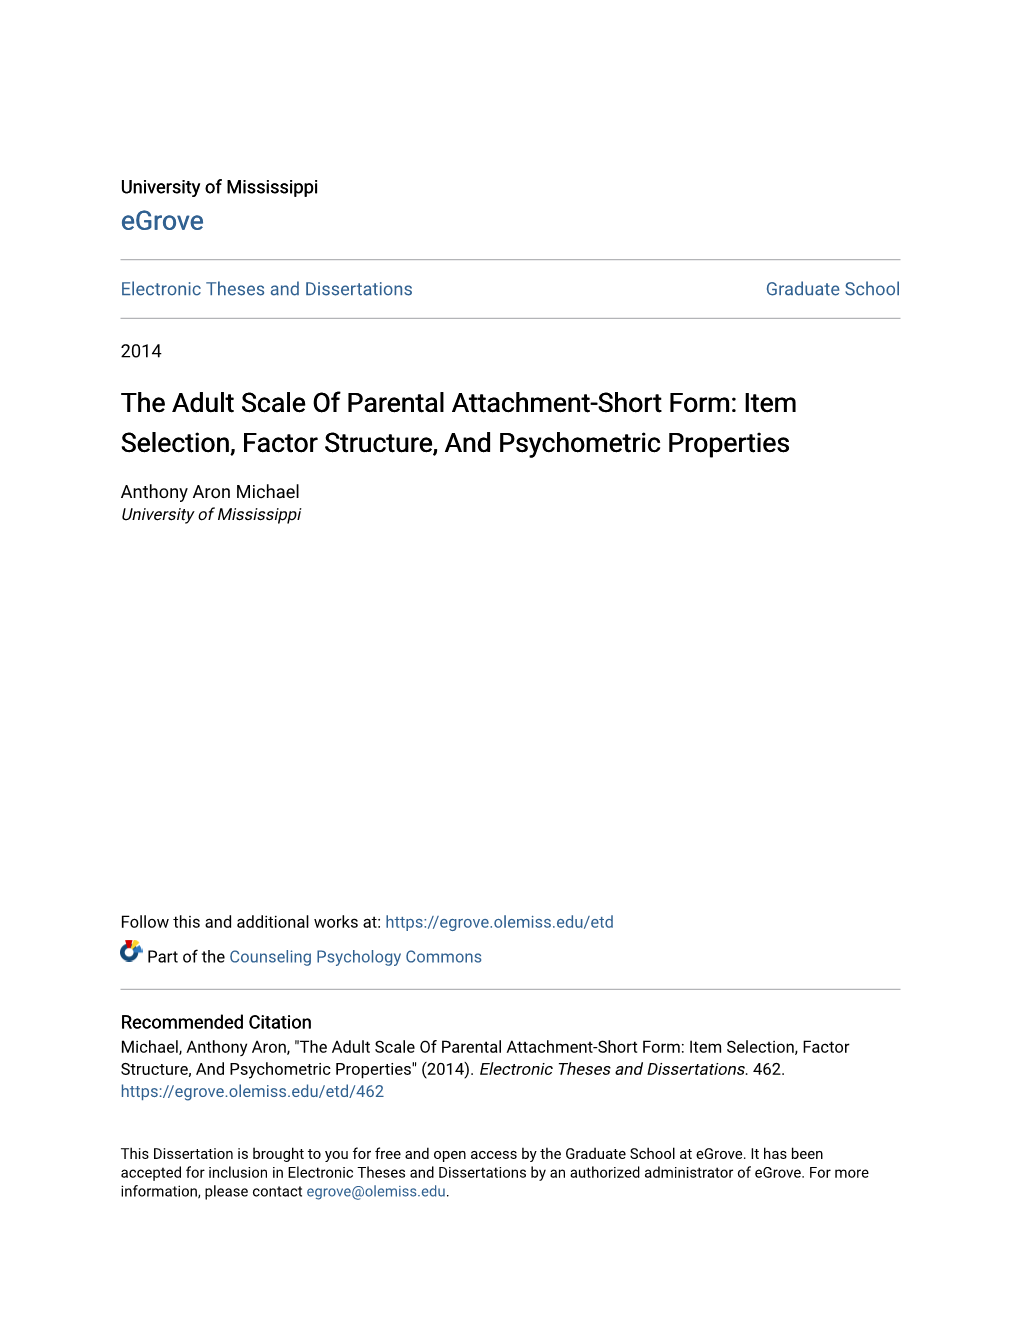 The Adult Scale of Parental Attachment-Short Form: Item Selection, Factor Structure, and Psychometric Properties